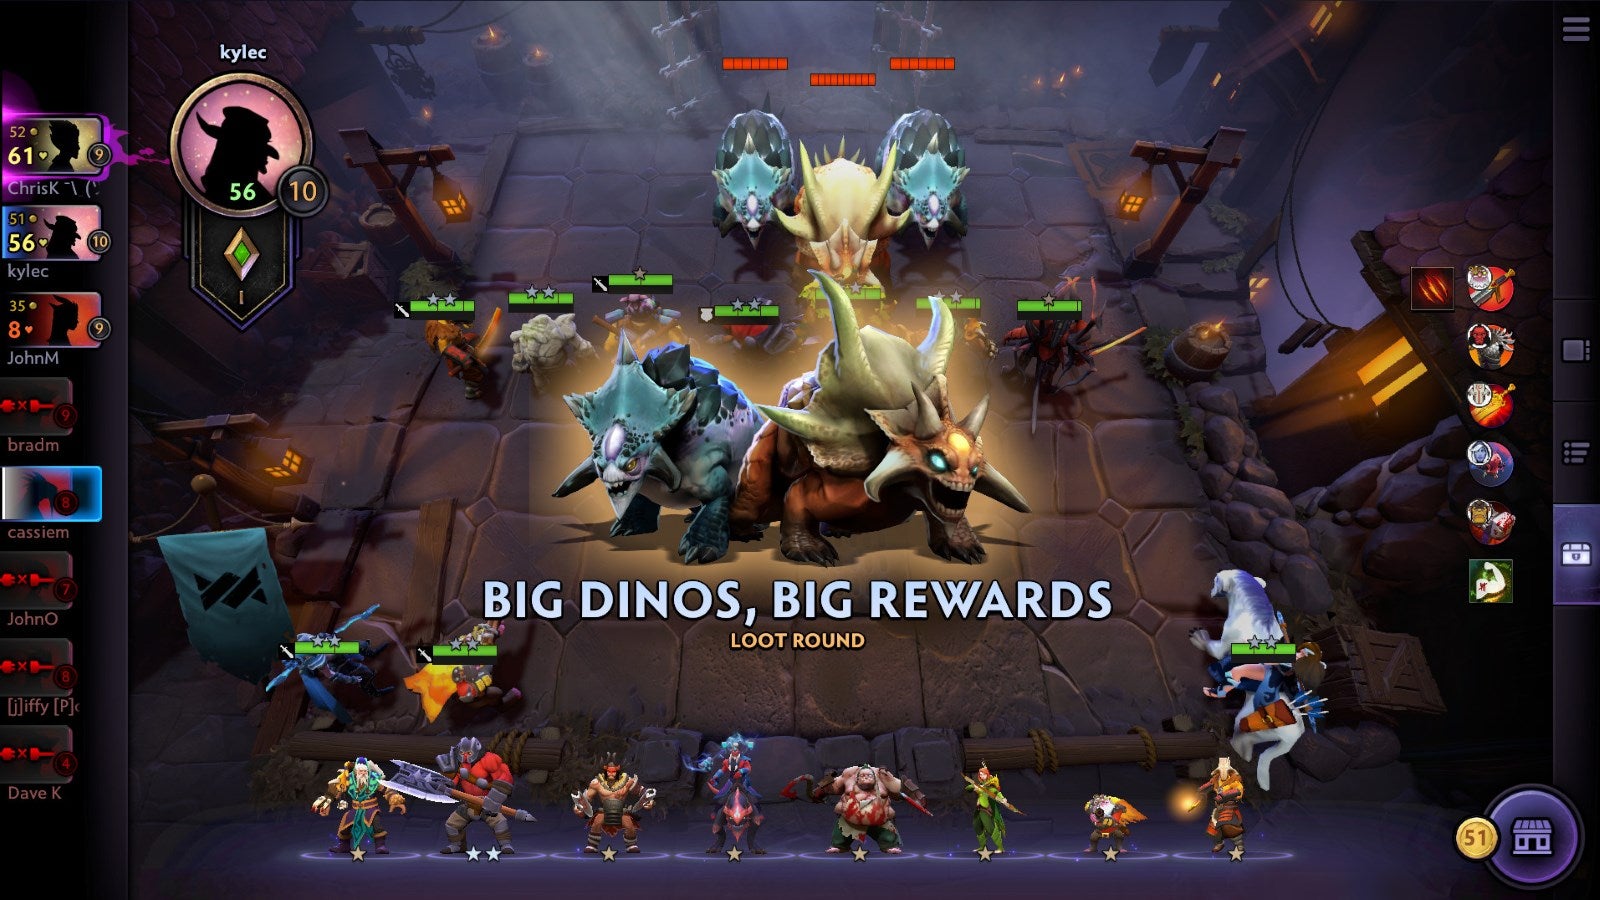 Image for Dota Underlords, Valve's take on Auto Chess, is now free for all